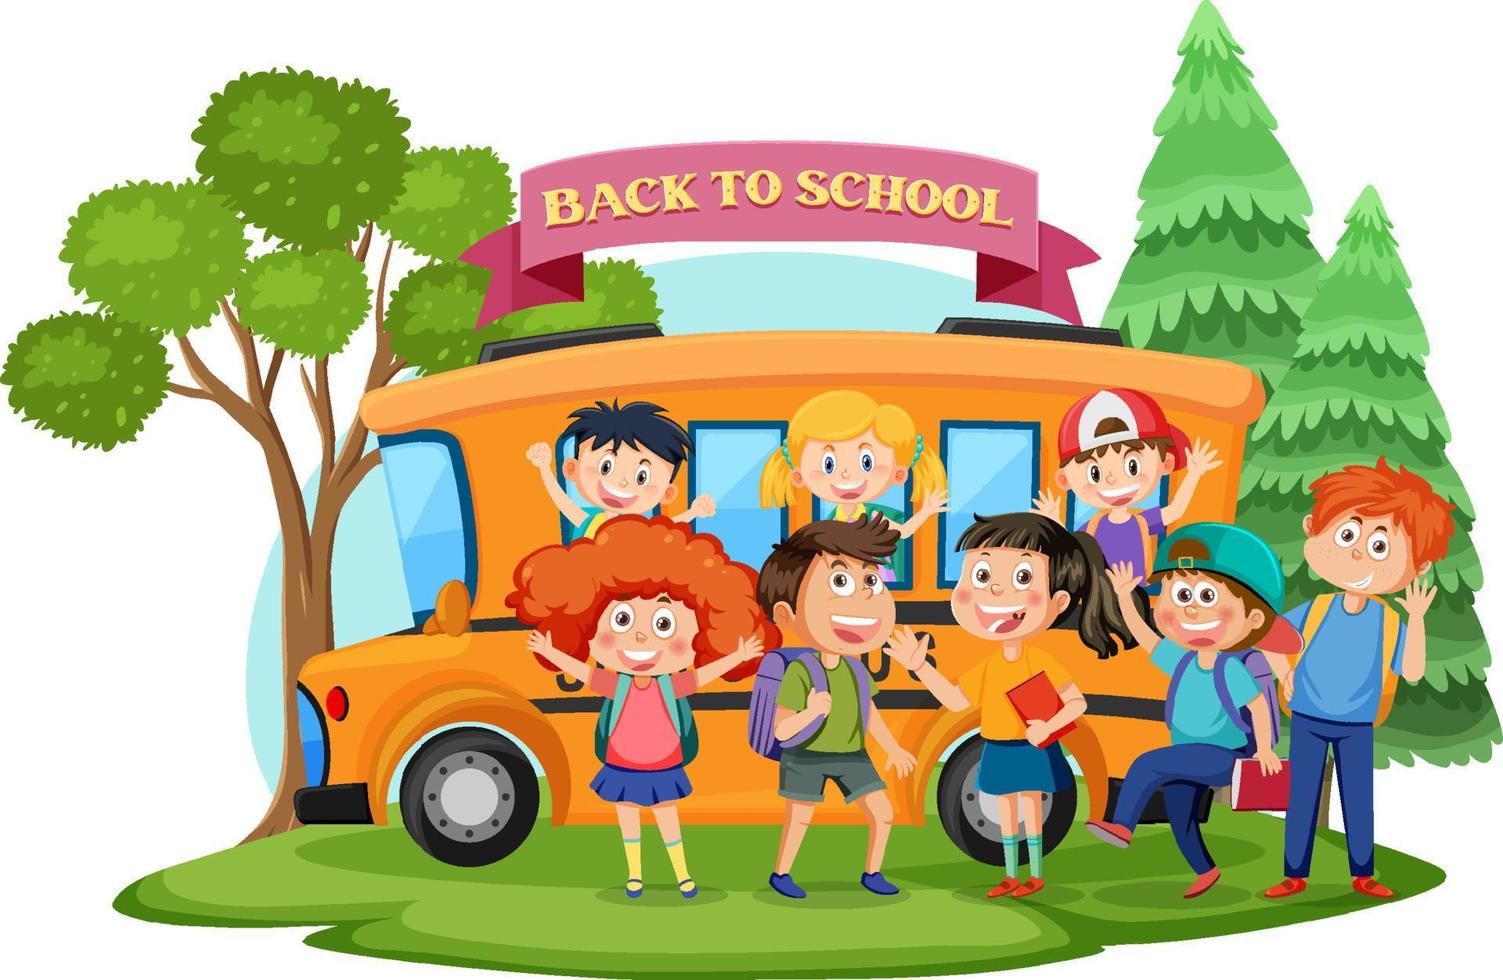 Back to school with kids cartoon character vector